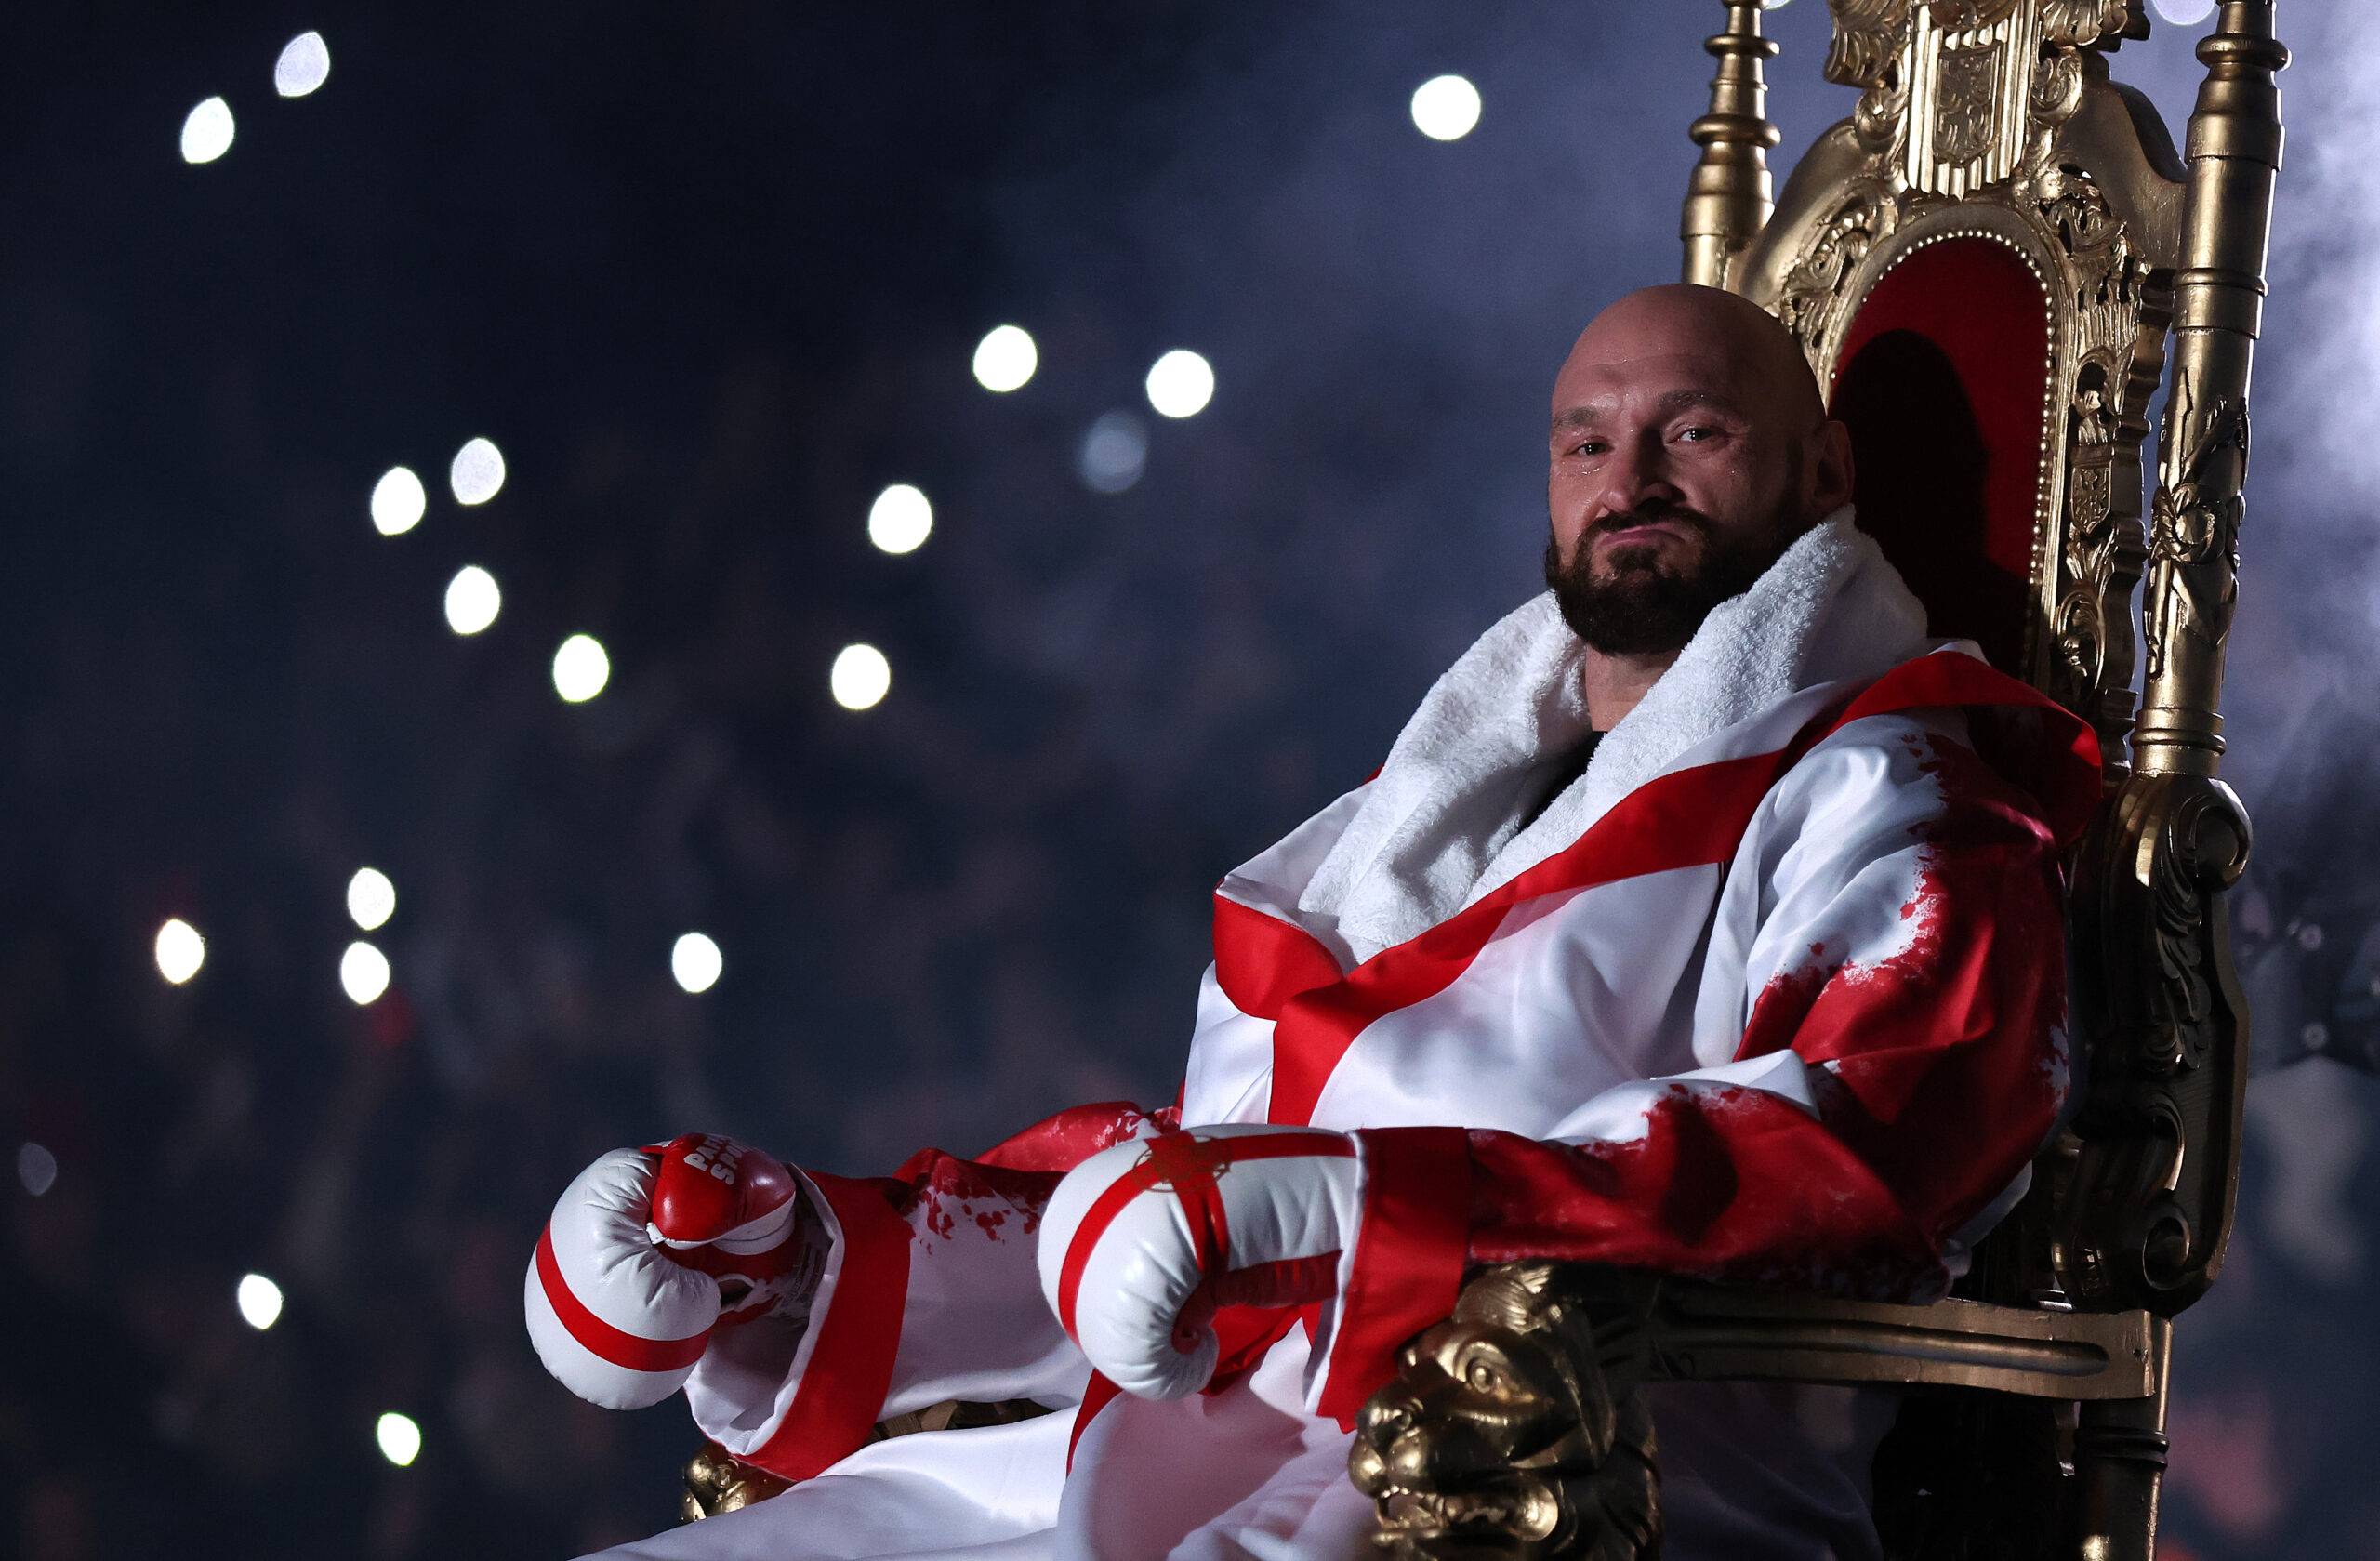 Tyson Fury heading to the ring for boxing match